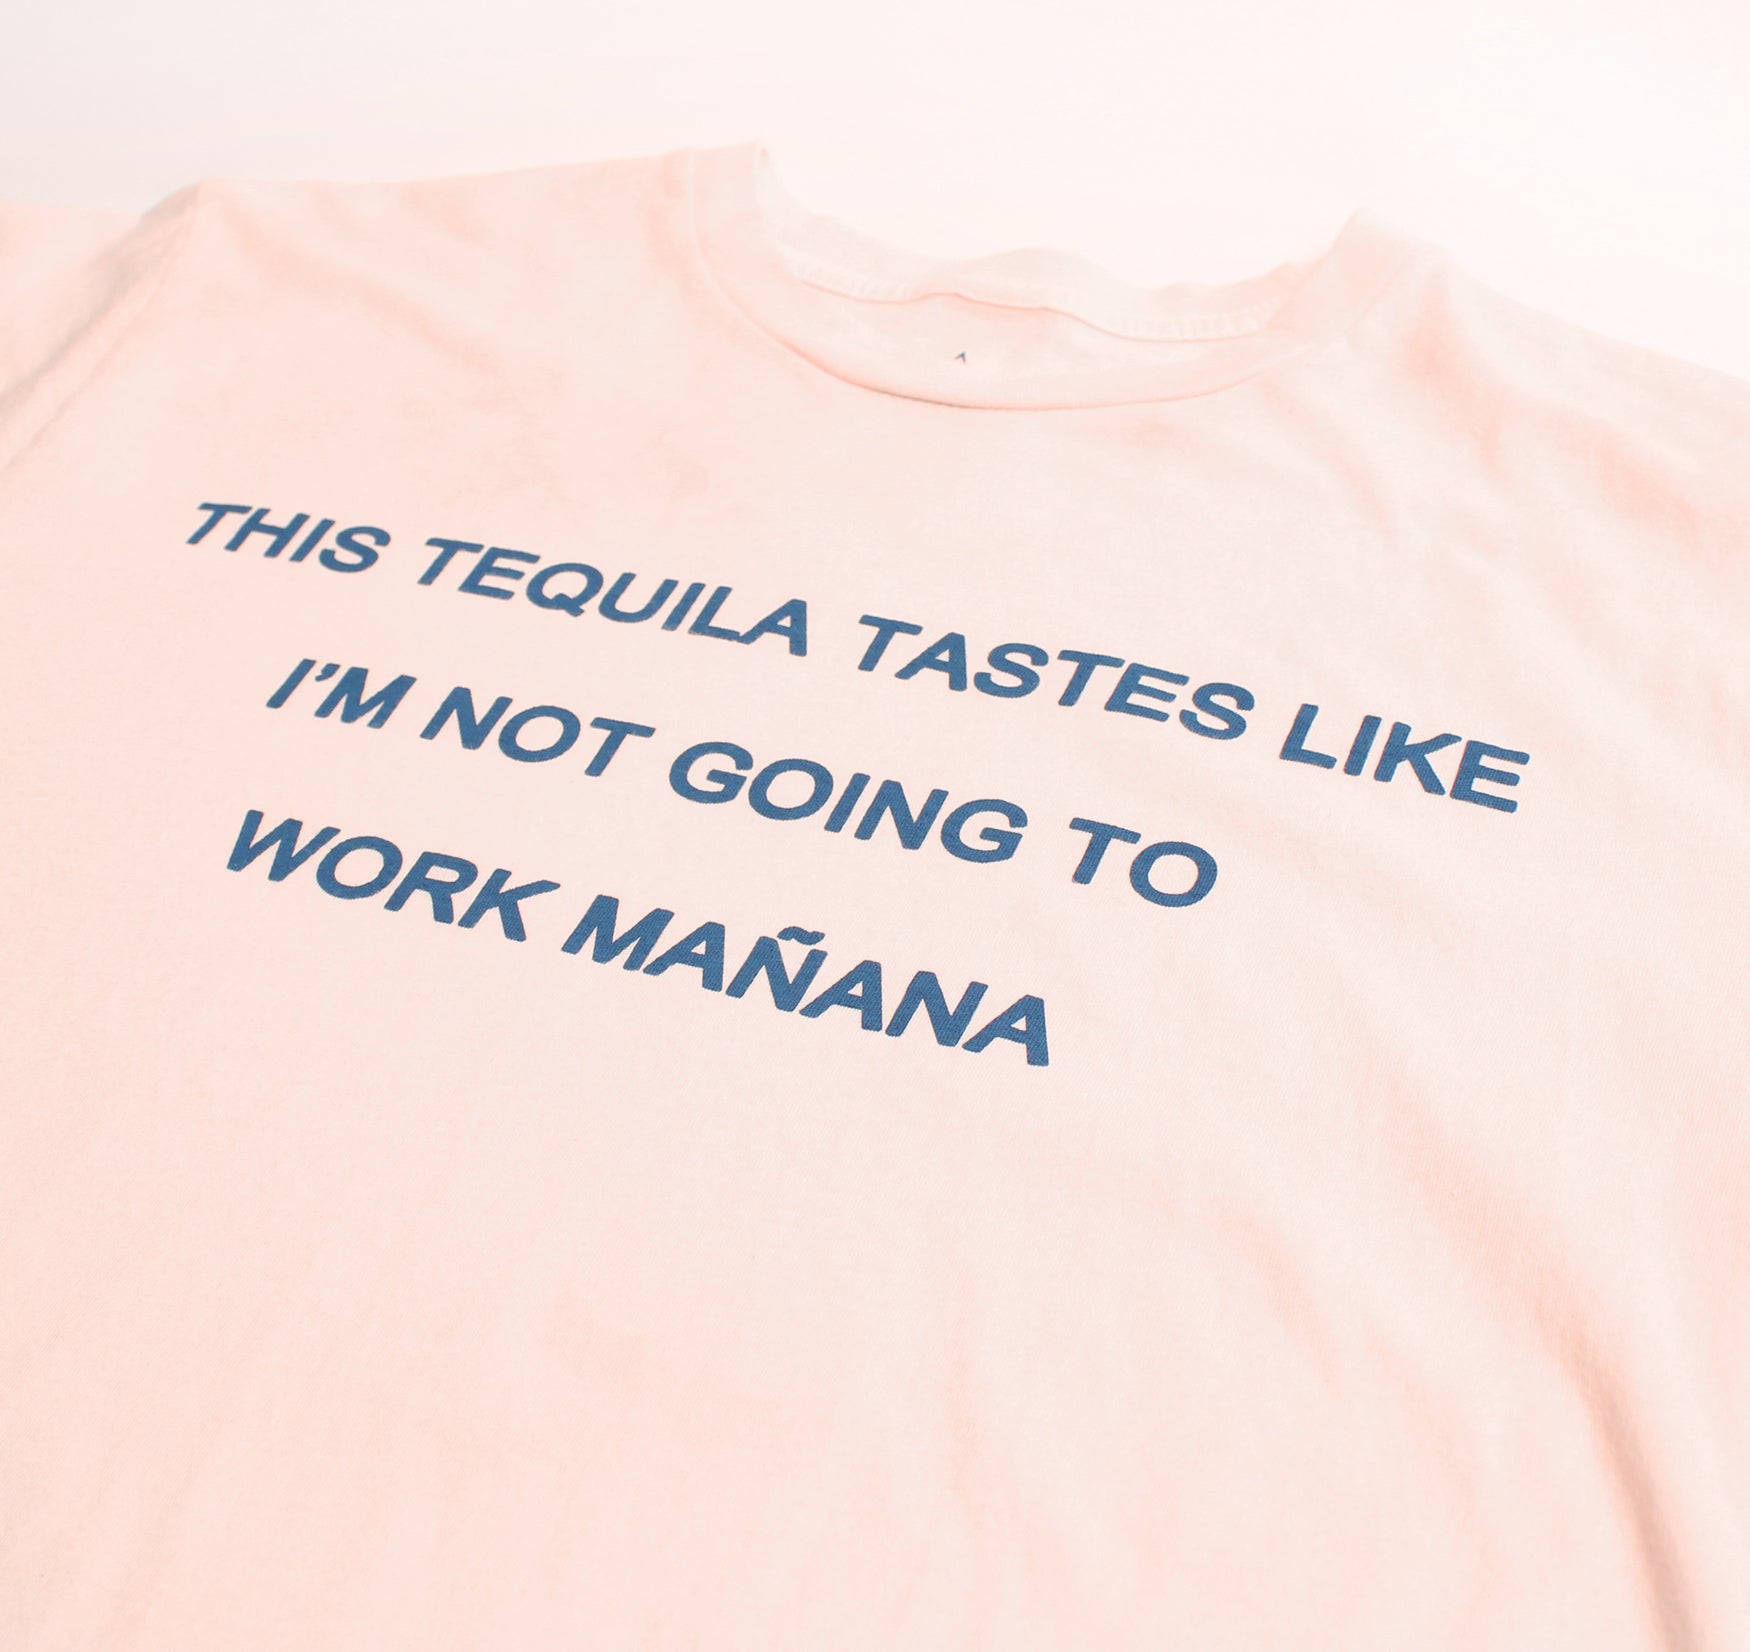 Tequila Tastes Like I'm Not Going To Work Manana, t-shirt by Altru Apparel